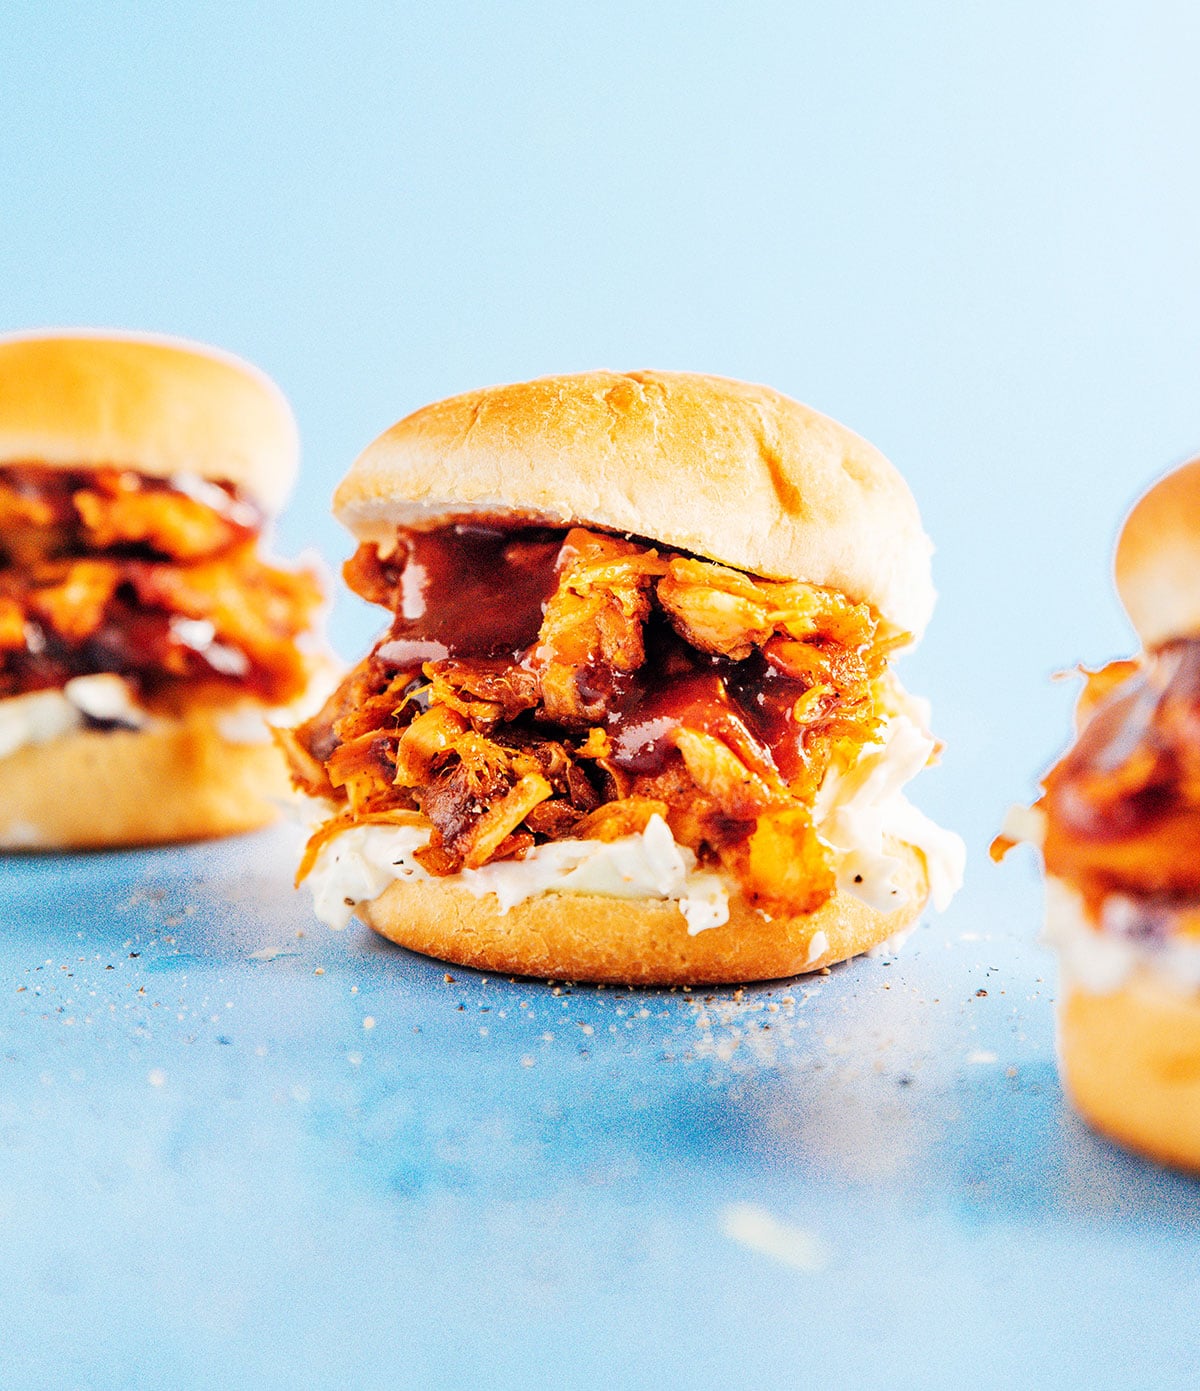 Up close image of bbq jackfruit slider with coleslaw and dripped bbq sauce.